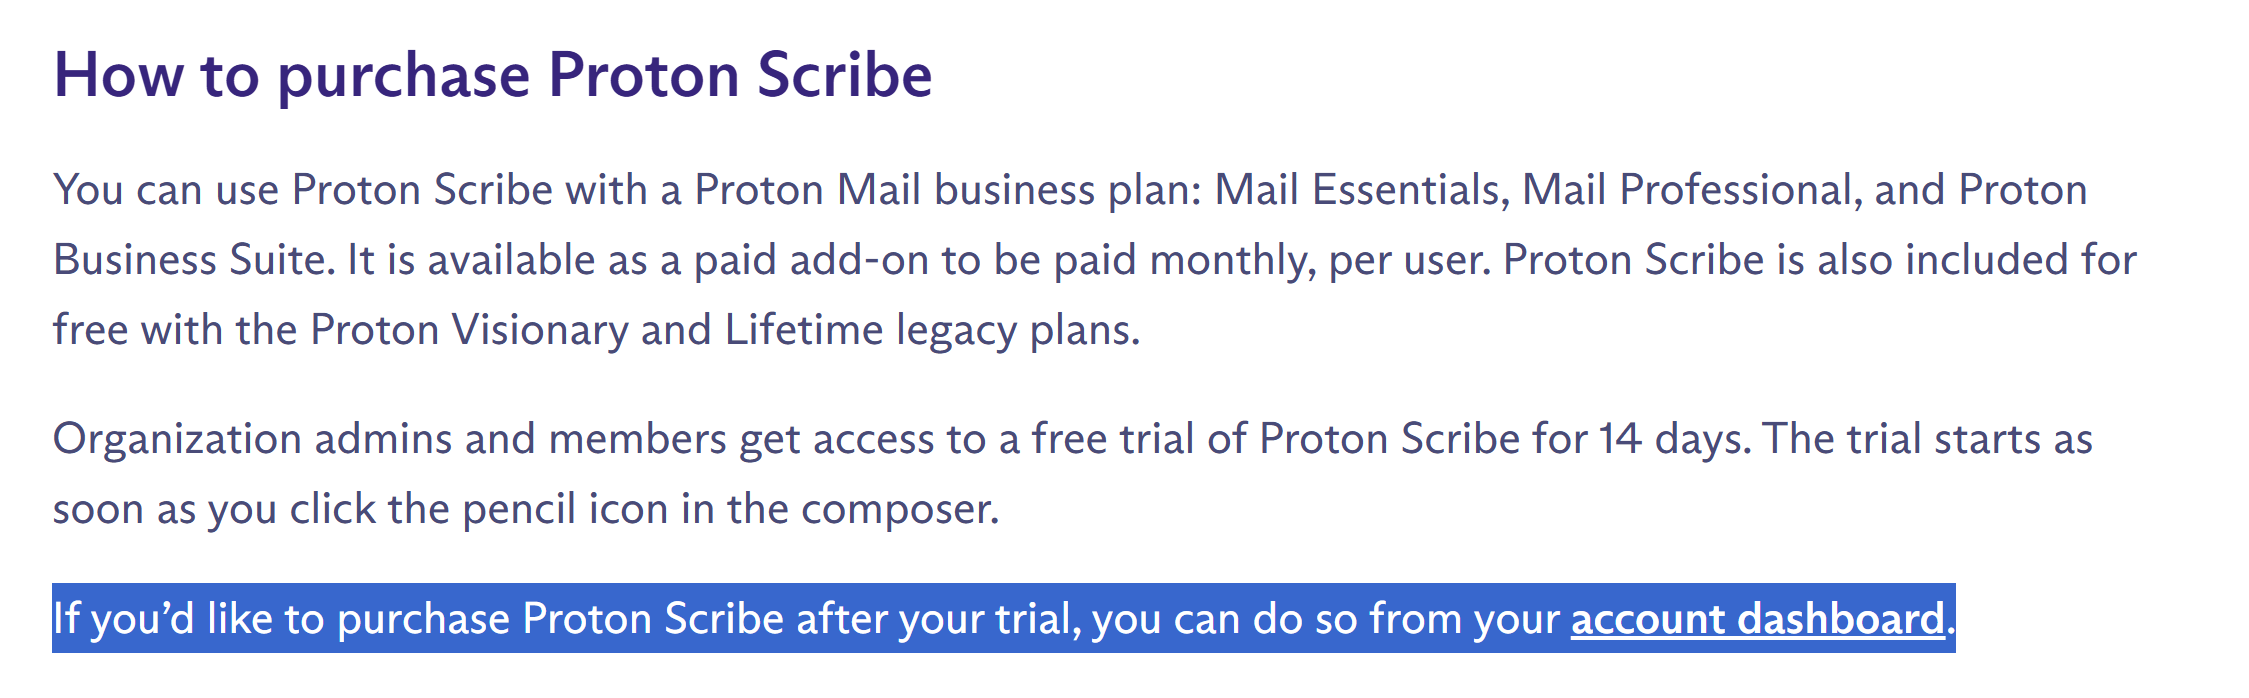 You can use Proton Scribe with a Proton Mail business plan: Mail Essentials, Mail Professional, and Proton Business Suite. It is available as a paid add-on to be paid monthly, per user. Proton Scribe is also included for free with the Proton Visionary and Lifetime legacy plans. Organization admins and members get access to a free trial of Proton Scribe for 14 days. The trial starts as soon as you click the pencil icon in the composer. If you’d like to purchase Proton Scribe after your trial, you can do so from your account dashboard.